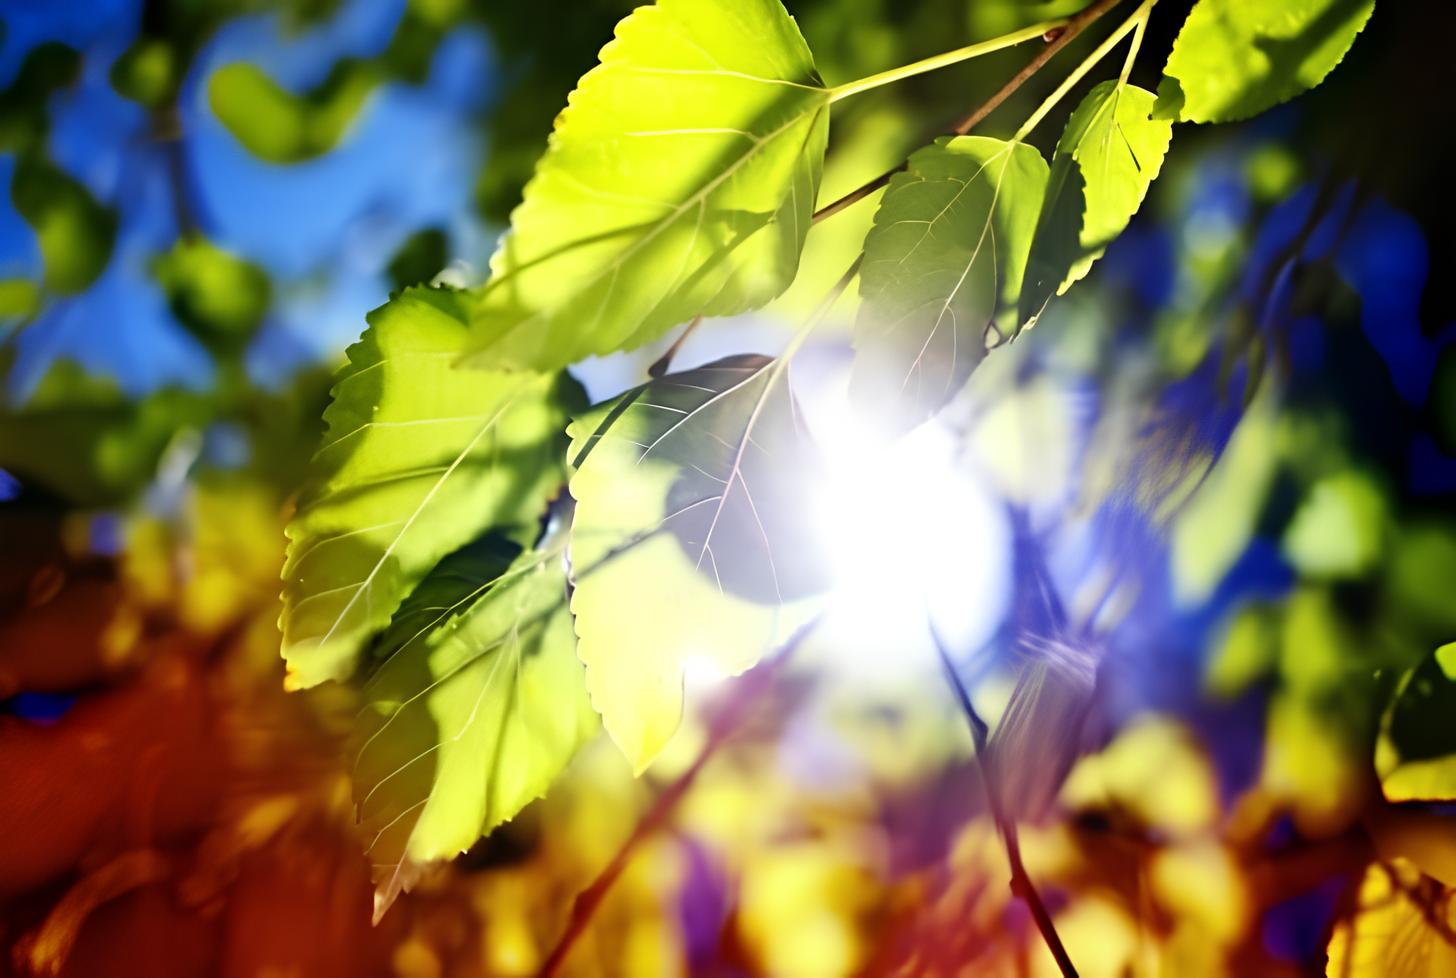 photosynthesis-basics-understanding-why-blue-light-is-optimal-for-photosynthesis